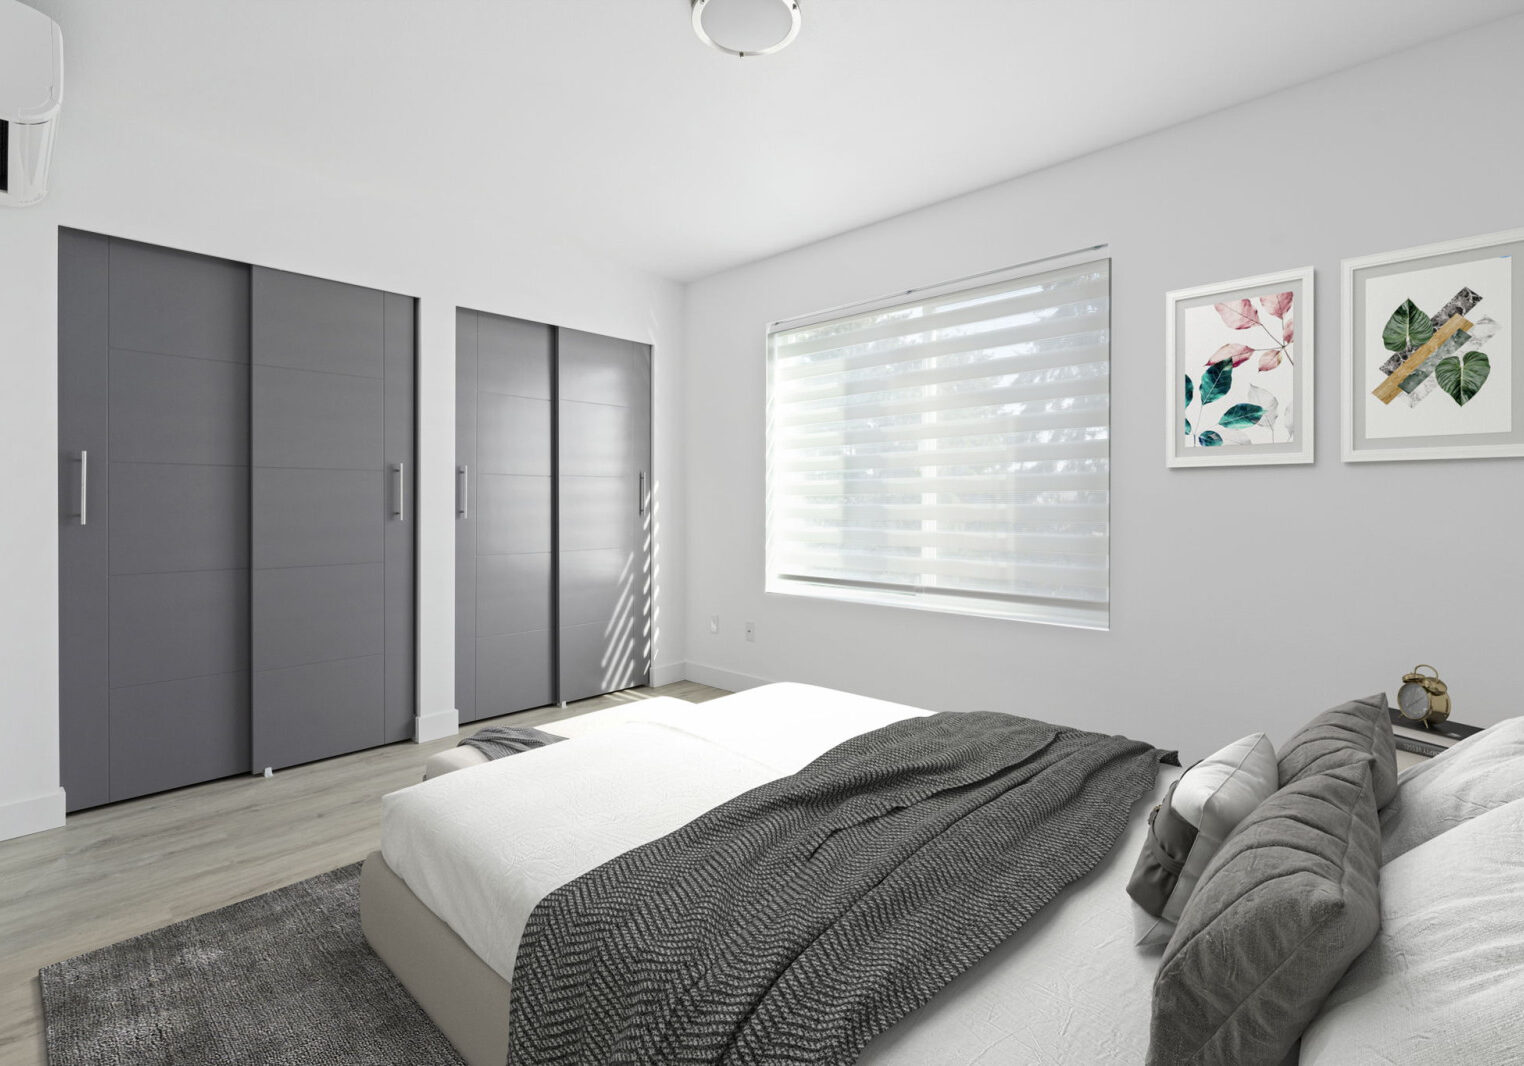 Virtual Staging Solutions transformed a bedroom into a serene space, featuring a white bed and grey closets.